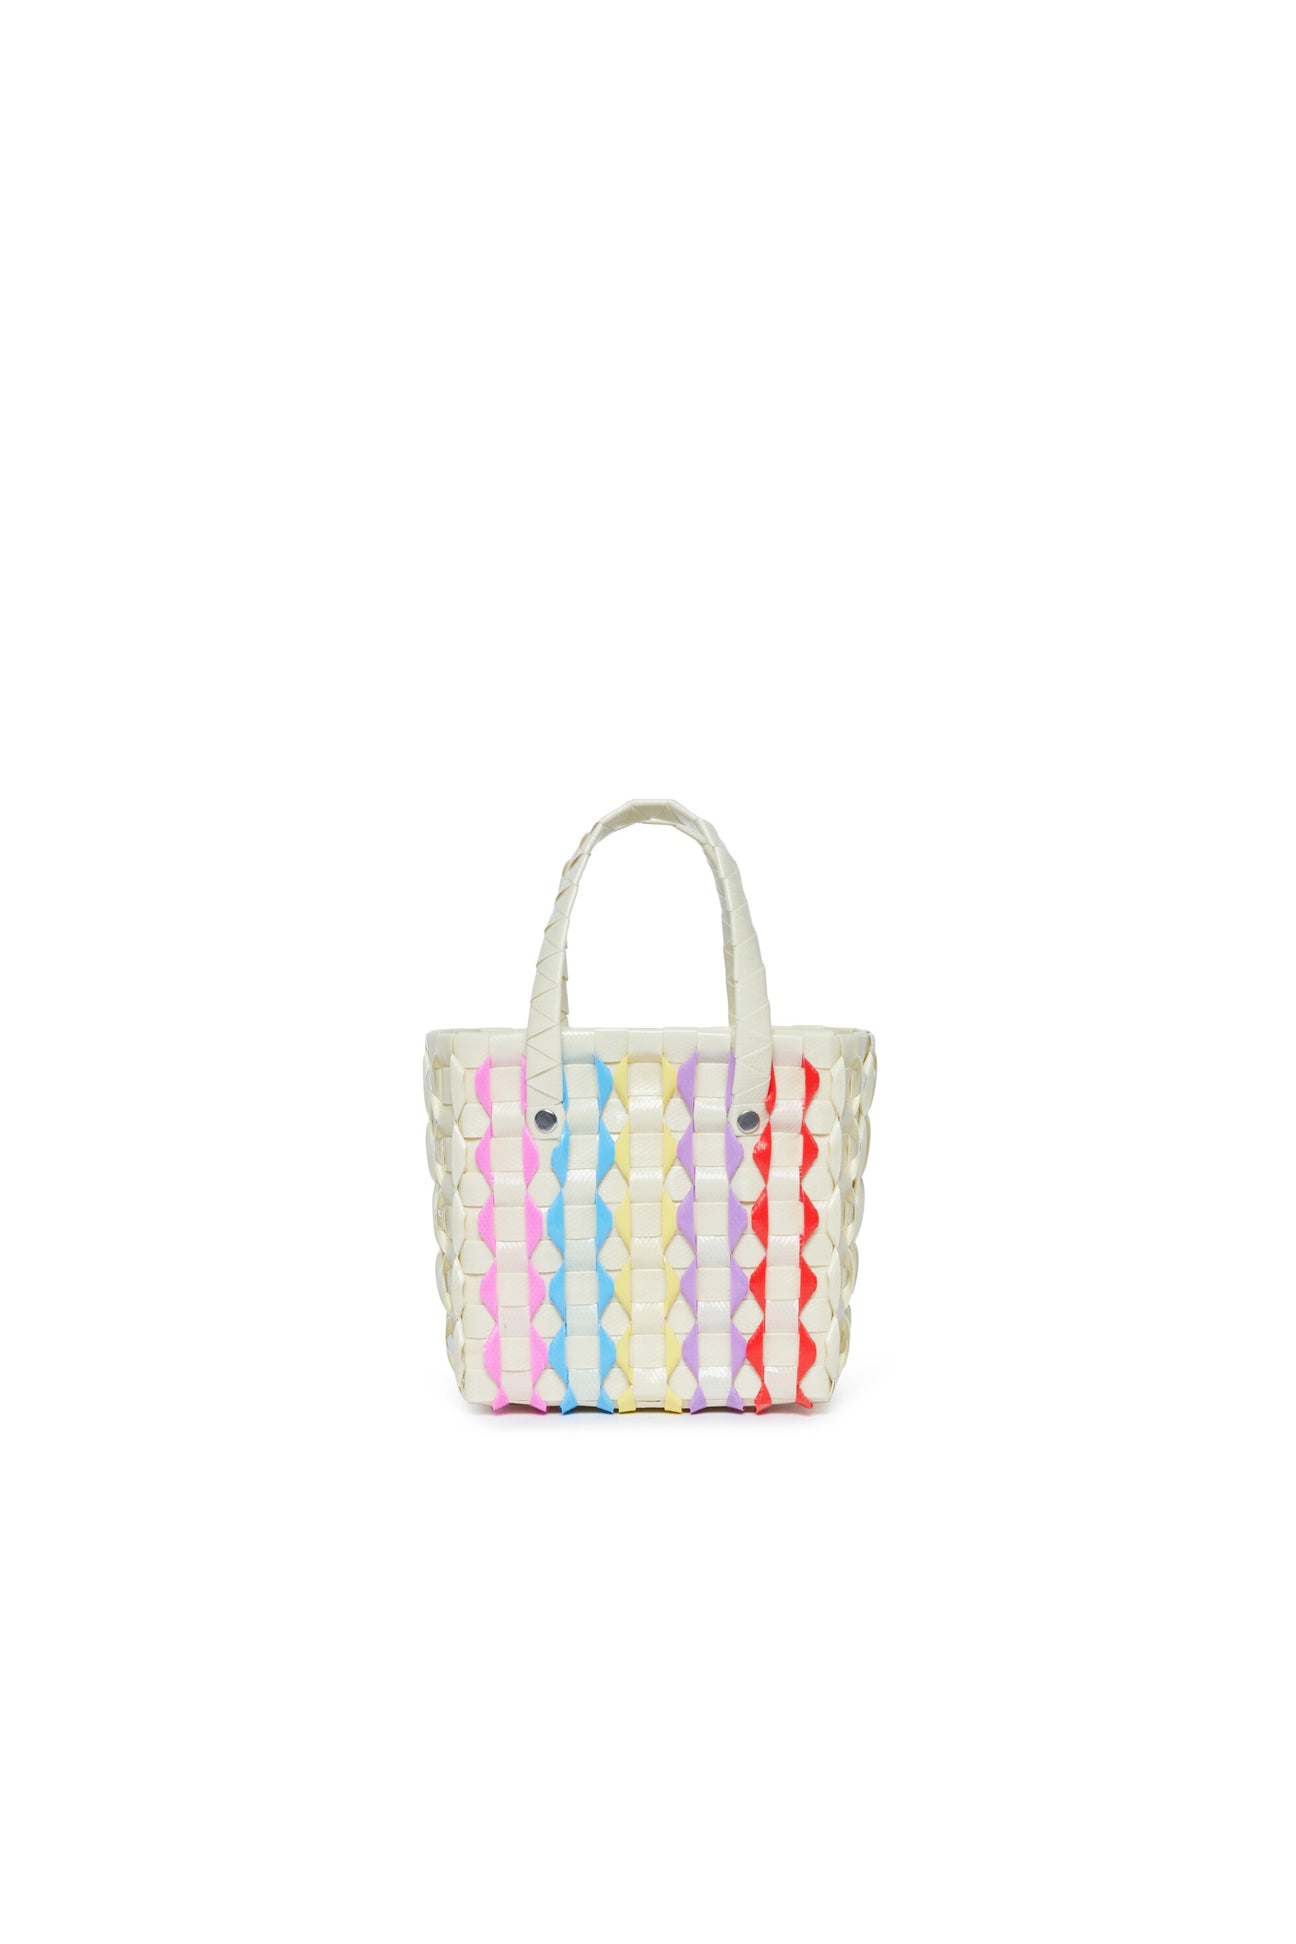 Woven Pastry bag Woven Pastry bag